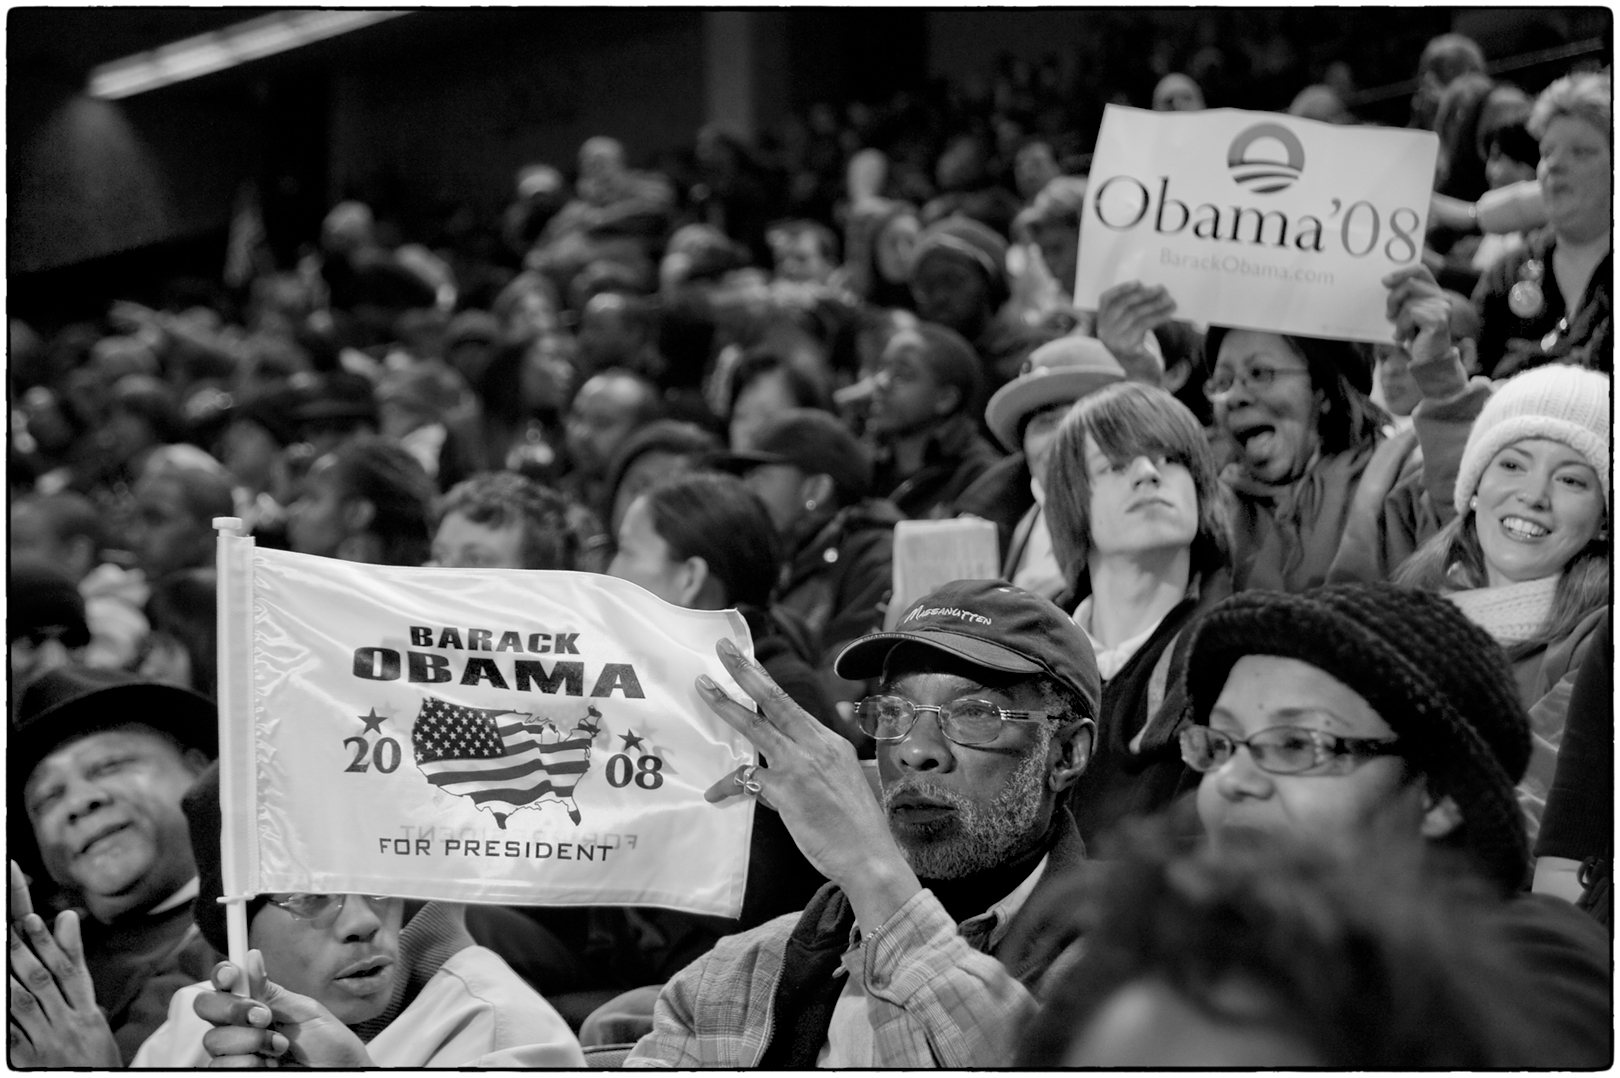 Two Signs Serious Happy_Obama Campaign_Baltimore MD_2-11-2008-0508.jpg